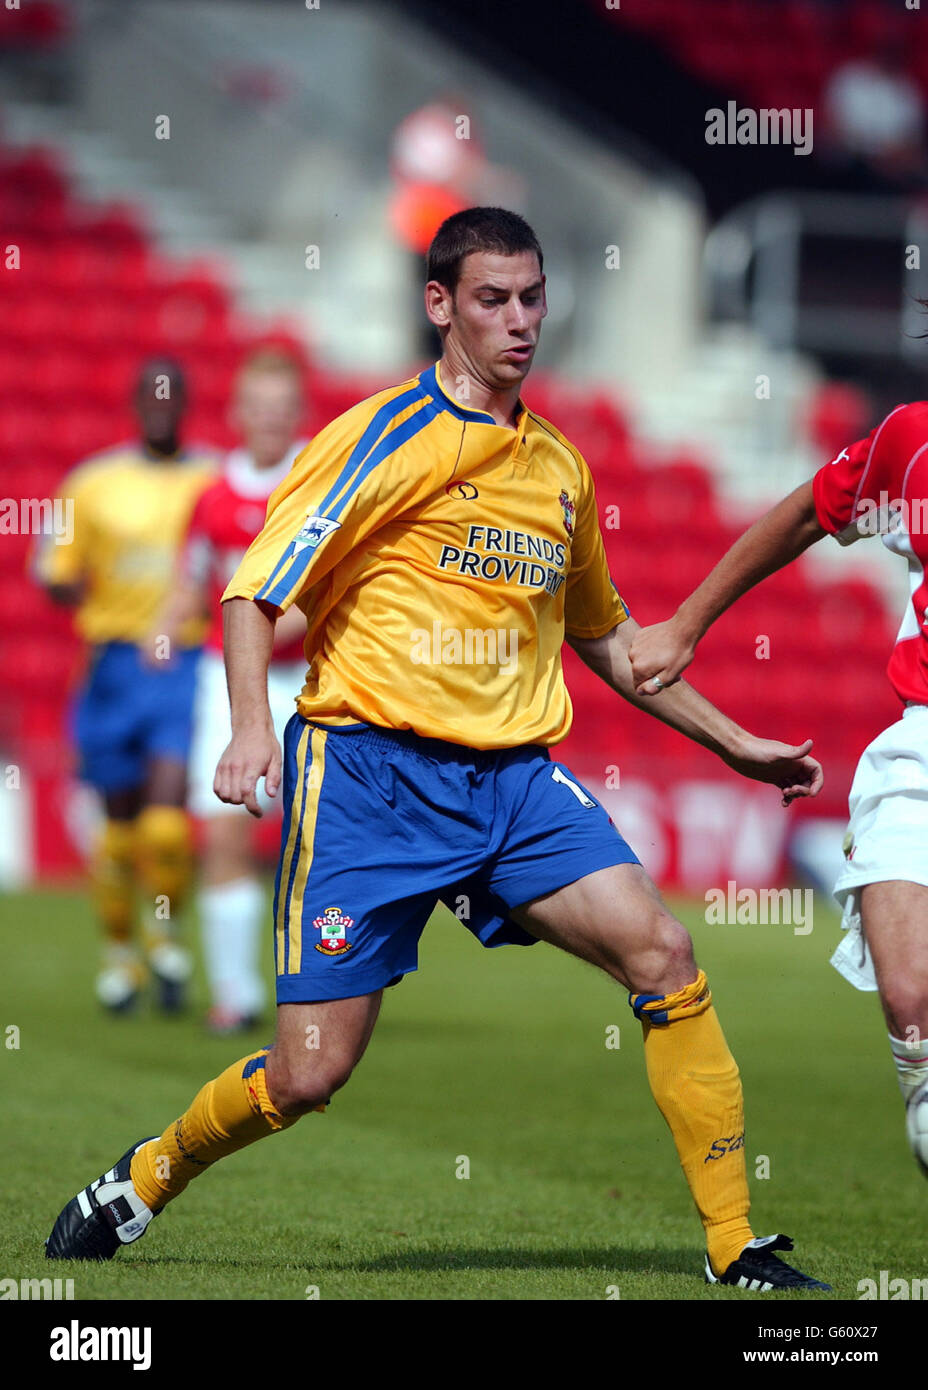 Rory Delap in action for Southampton during the pre-season friendly game between Southampton and FC Utrecht at St Mary's stadium, Southampton. Stock Photo